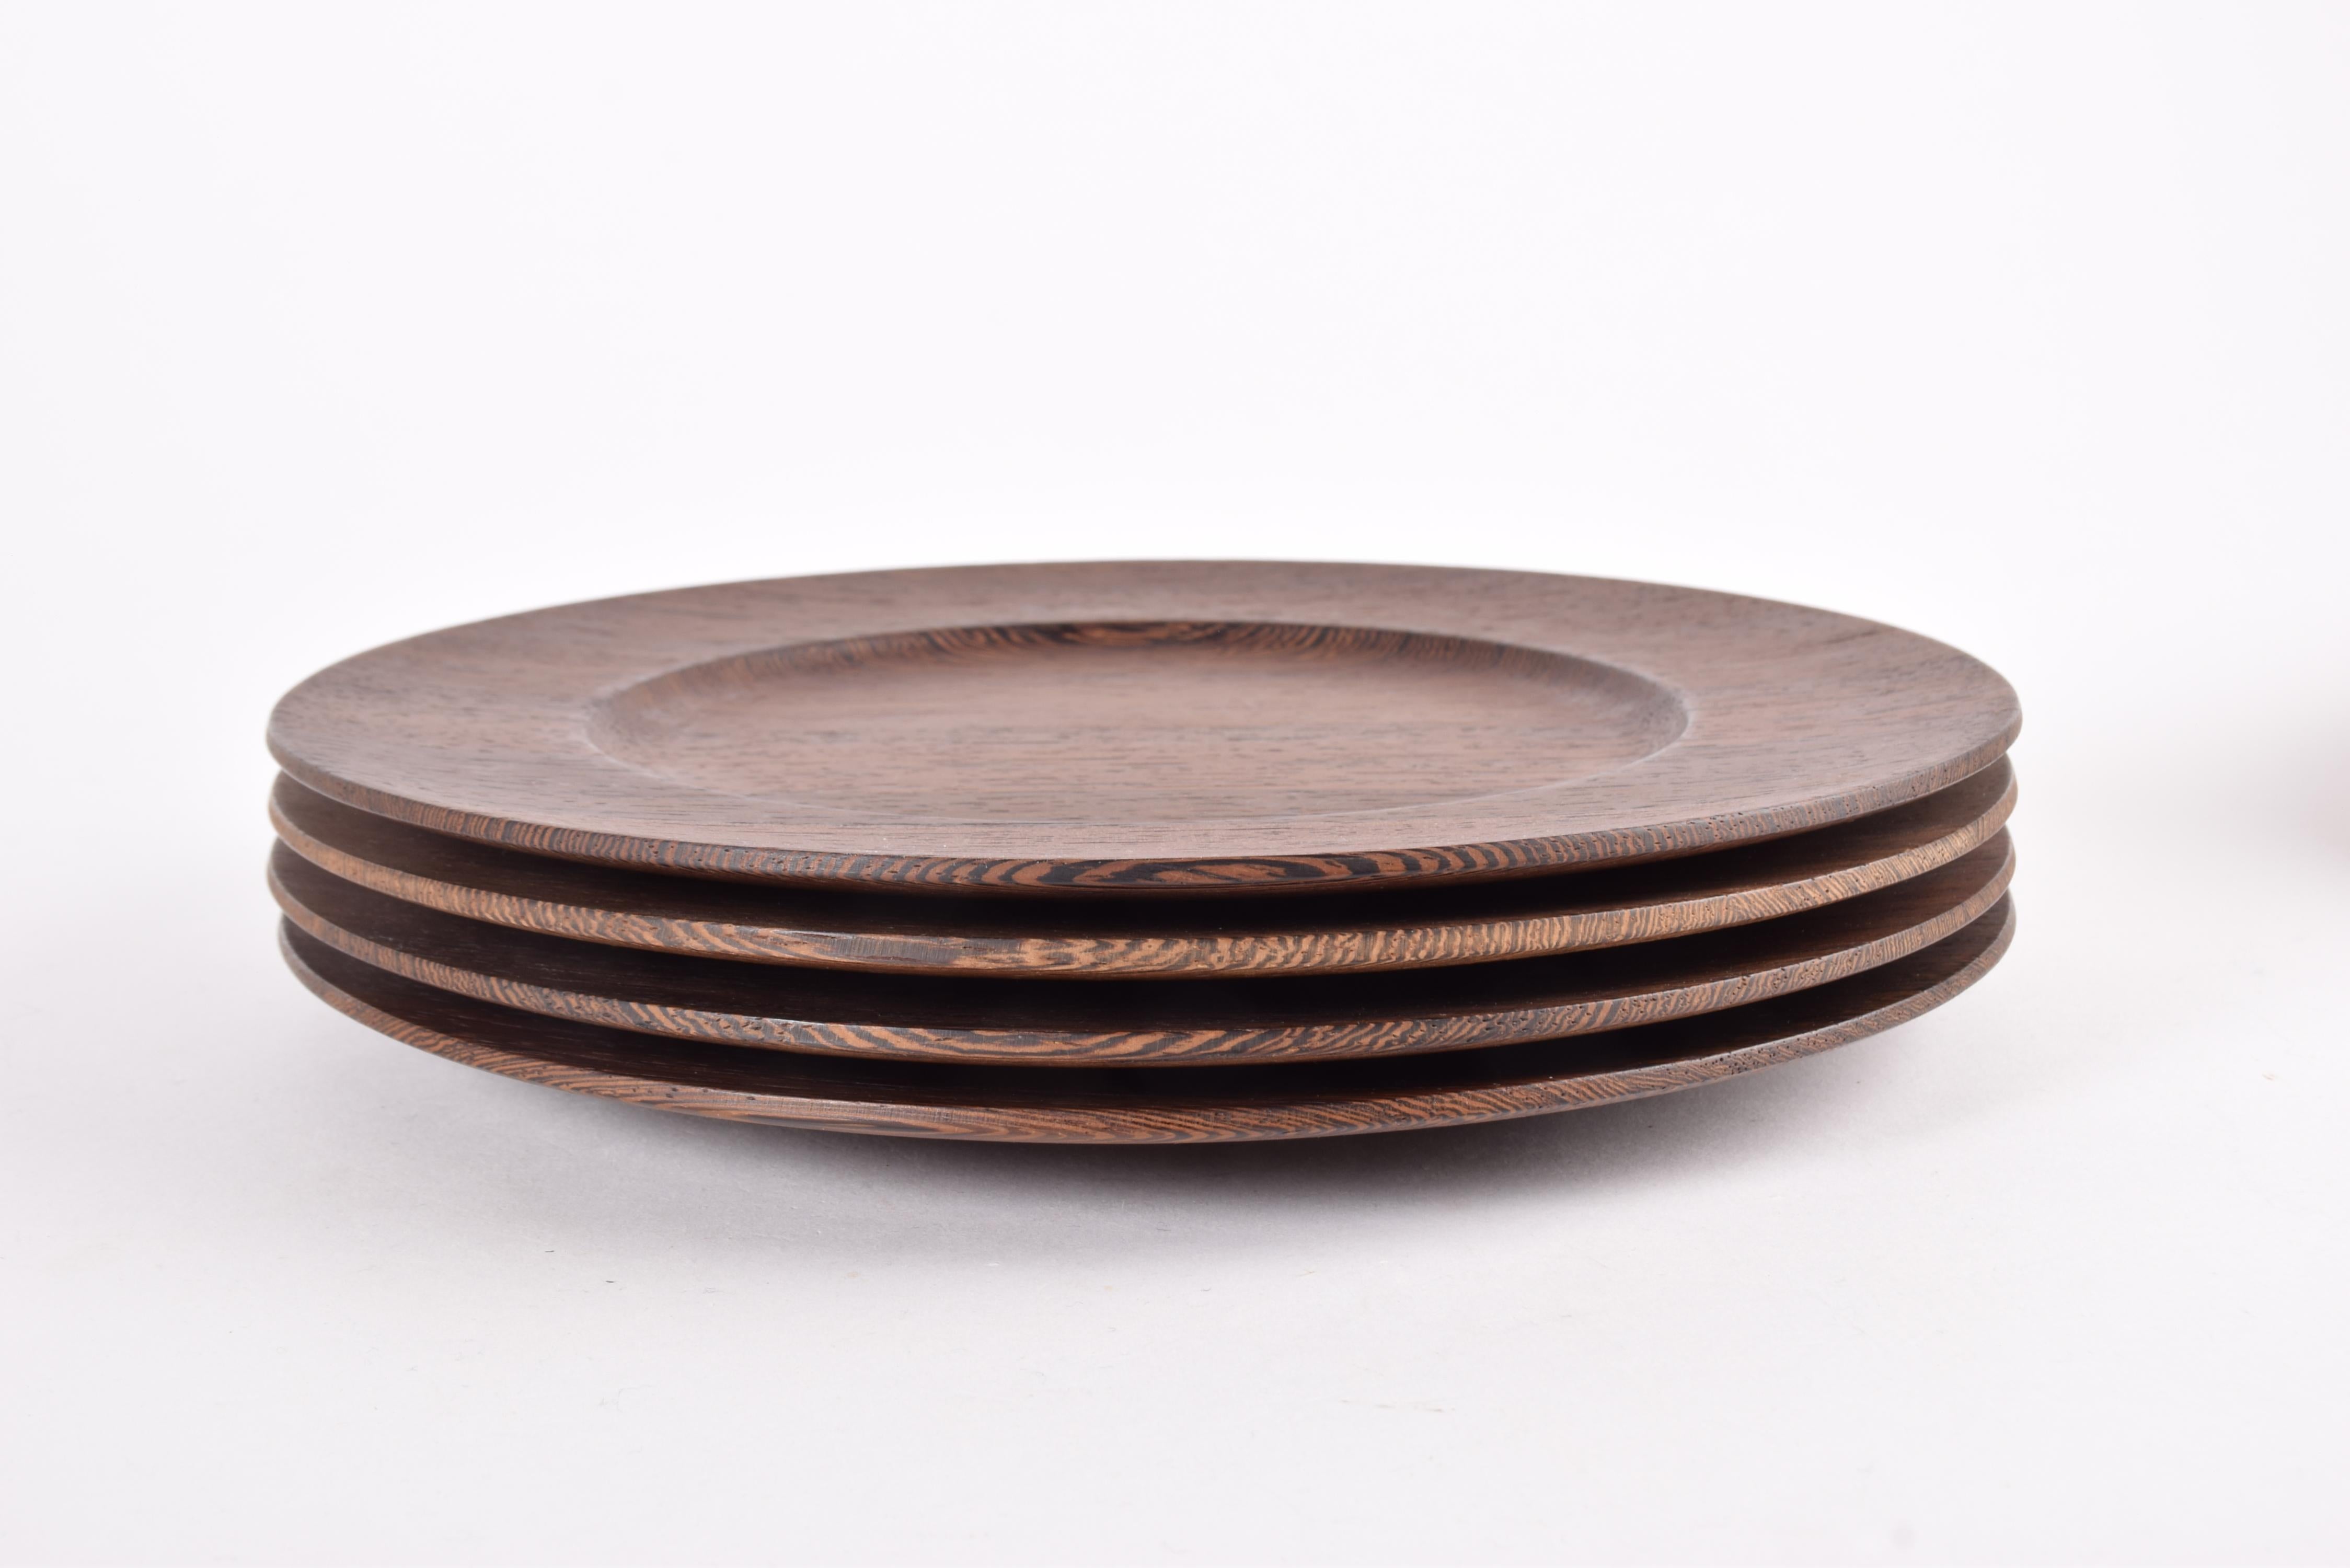 Set of 4 coaster plates by Danish designer Jens Harald Quistgaard. Manufactured for Kronjyden by Nissen ca 1960s. 

The plates are made from solid Wengé, a rare wood with a beautiful grain and dark color.

Marked on back with a golden stamp from